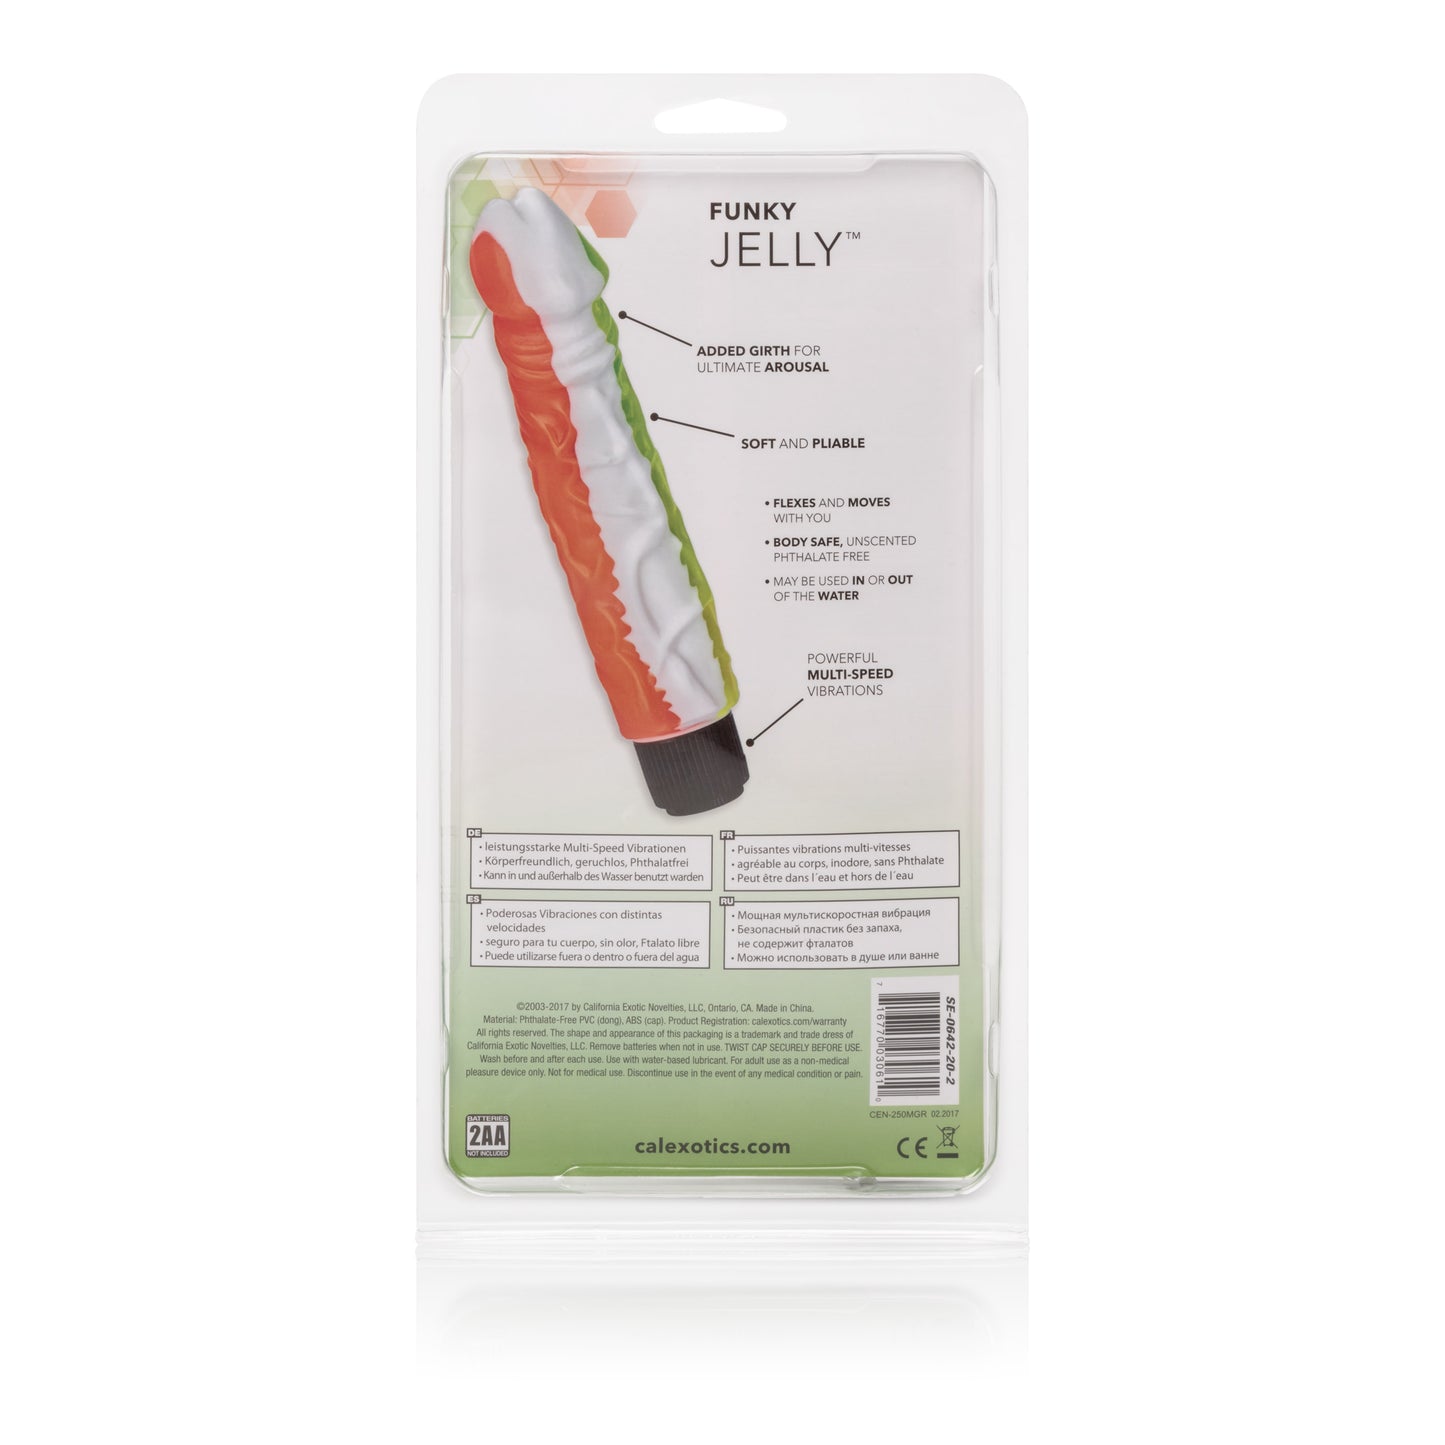 Funky Jelly Vibe 8 Inches - Orange/green